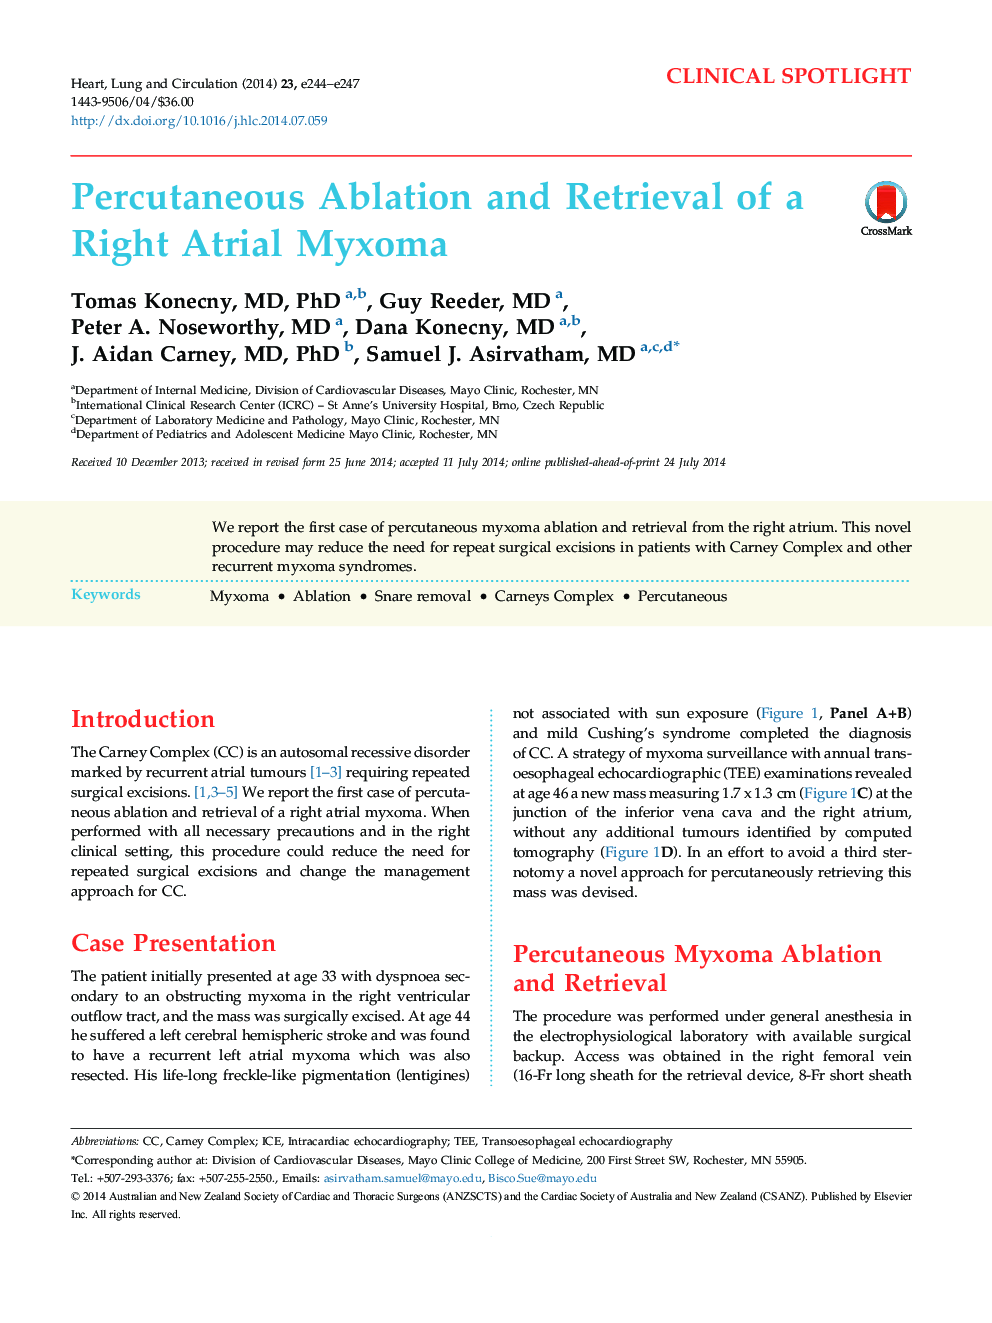 Percutaneous Ablation and Retrieval of a Right Atrial Myxoma